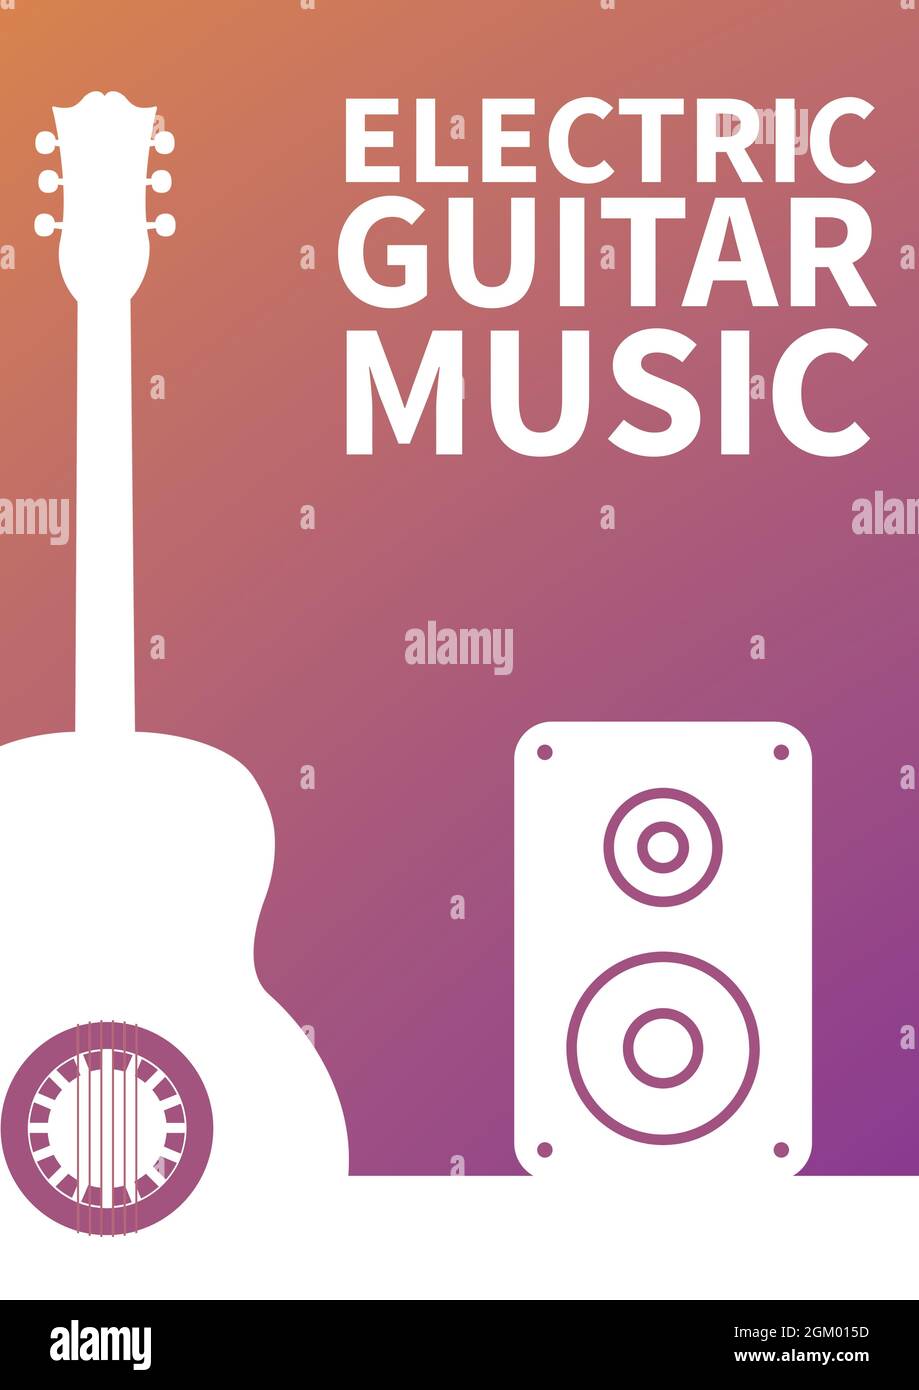 Electric guitar music text with guitar and speaker icon against gradient background Stock Photo